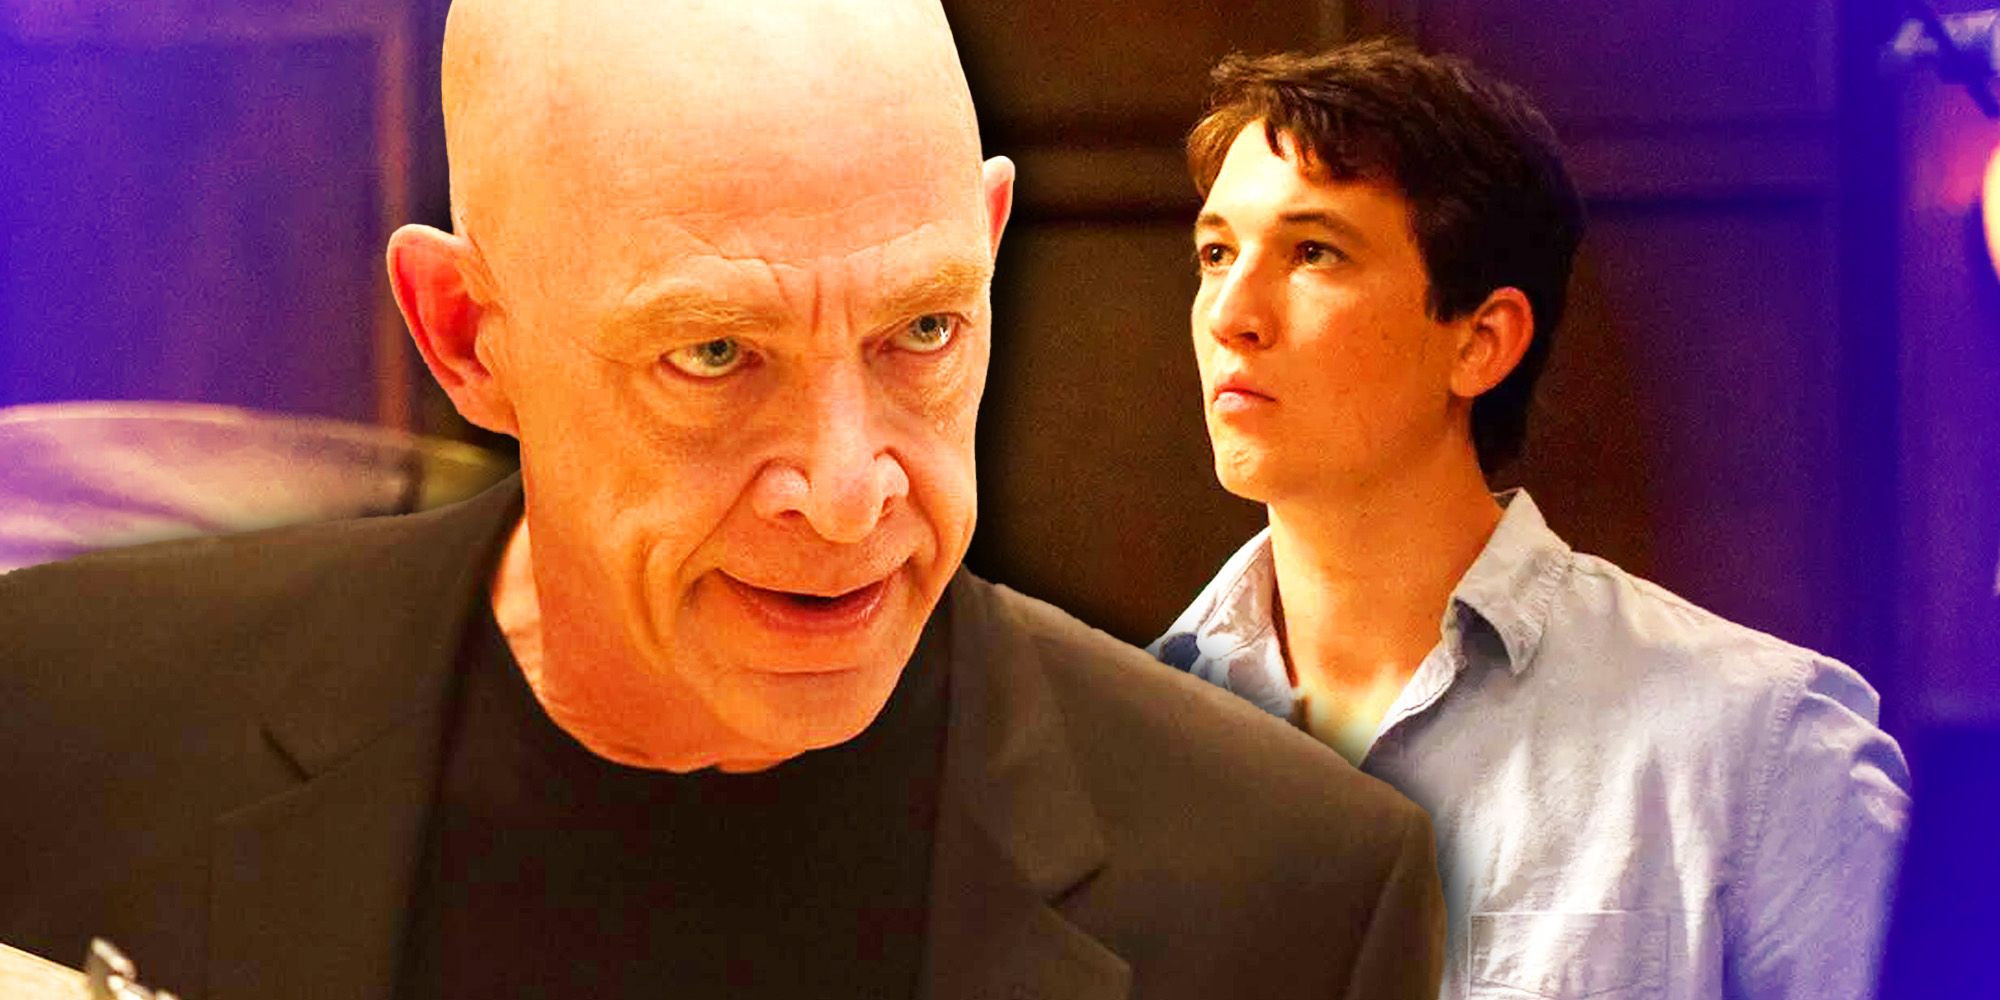 A collage of Terence Fletcher (JK Simmons) glaring and Andrew Neiman (Miles Teller) lookng worried in Whiplash